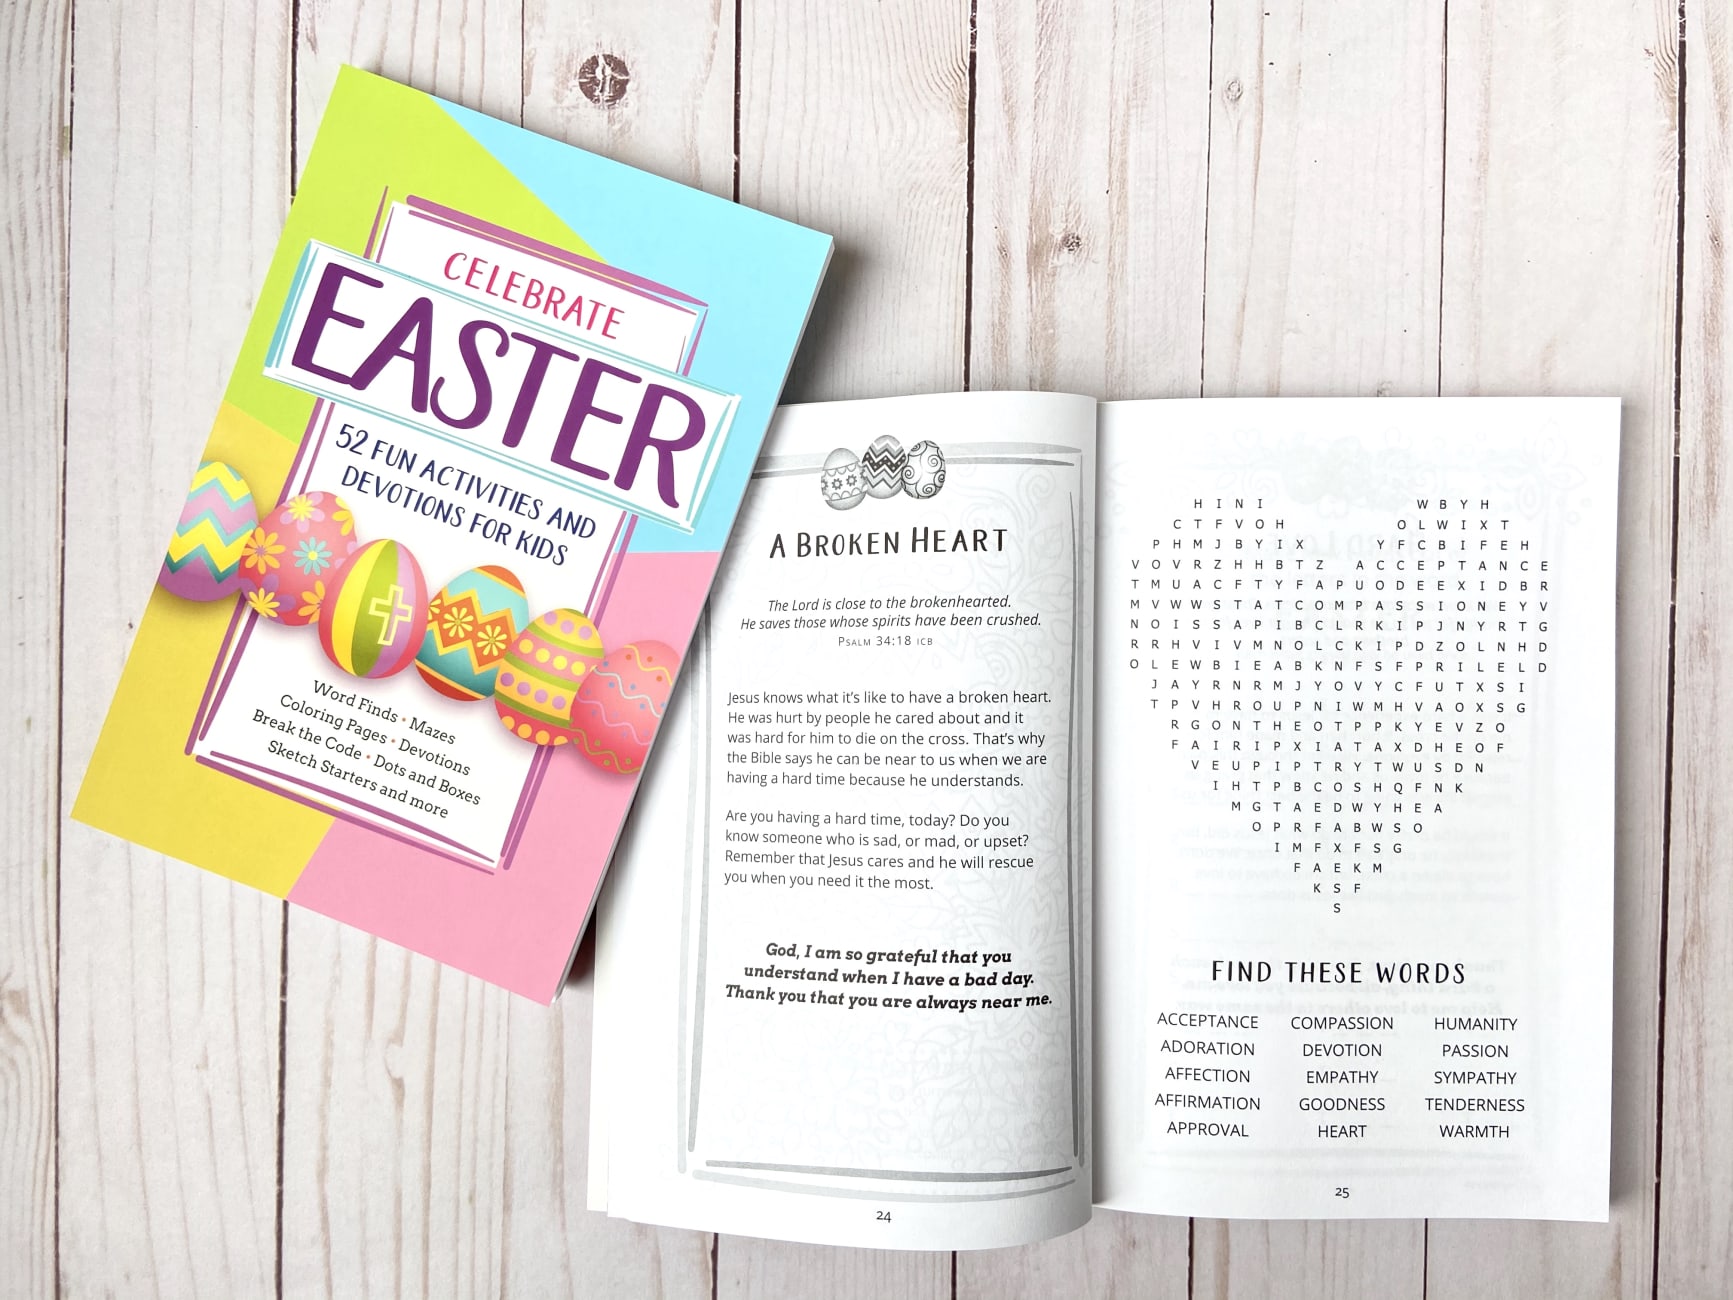 Celebrate Easter! 52 Fun Activities & Devotions For Kids Paperback